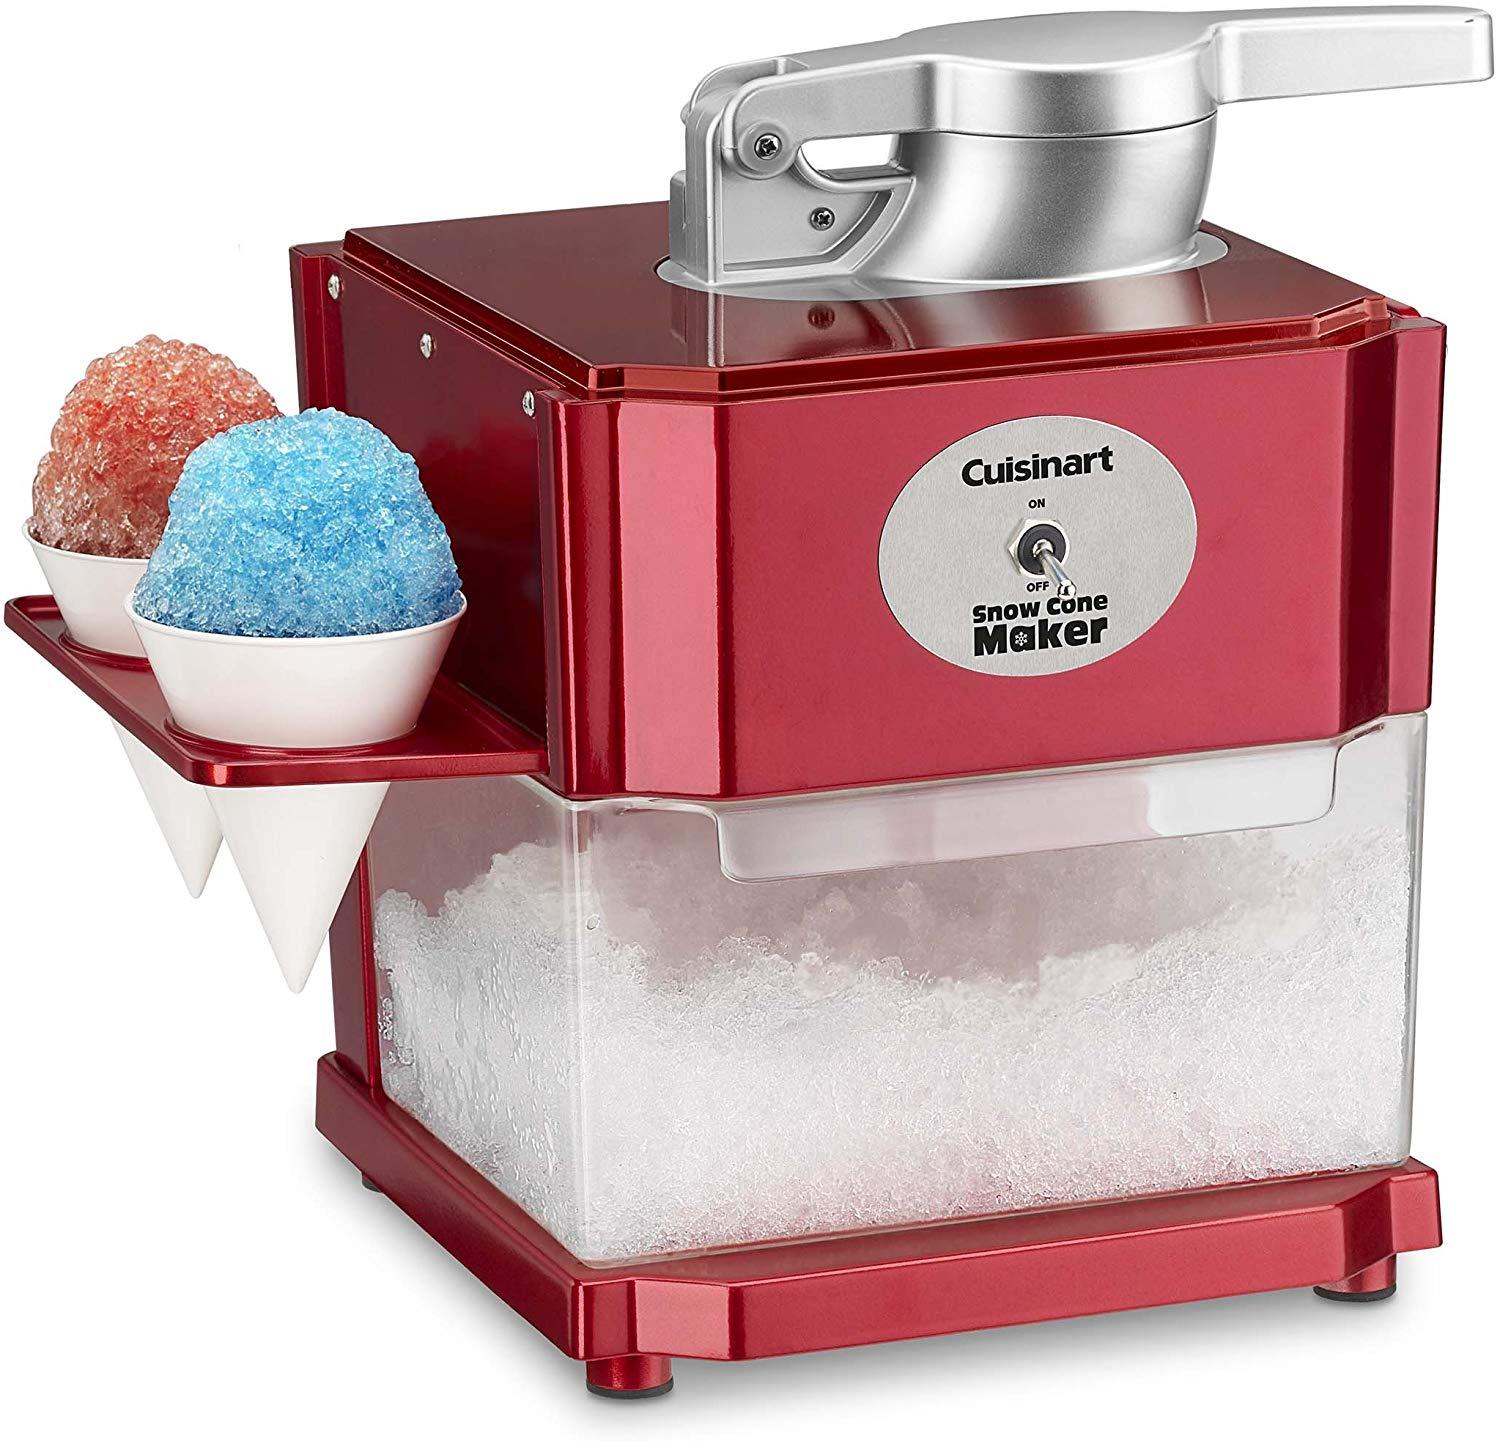 Cuisinart User-Friendly Crushed Ice Snow Cone Machine